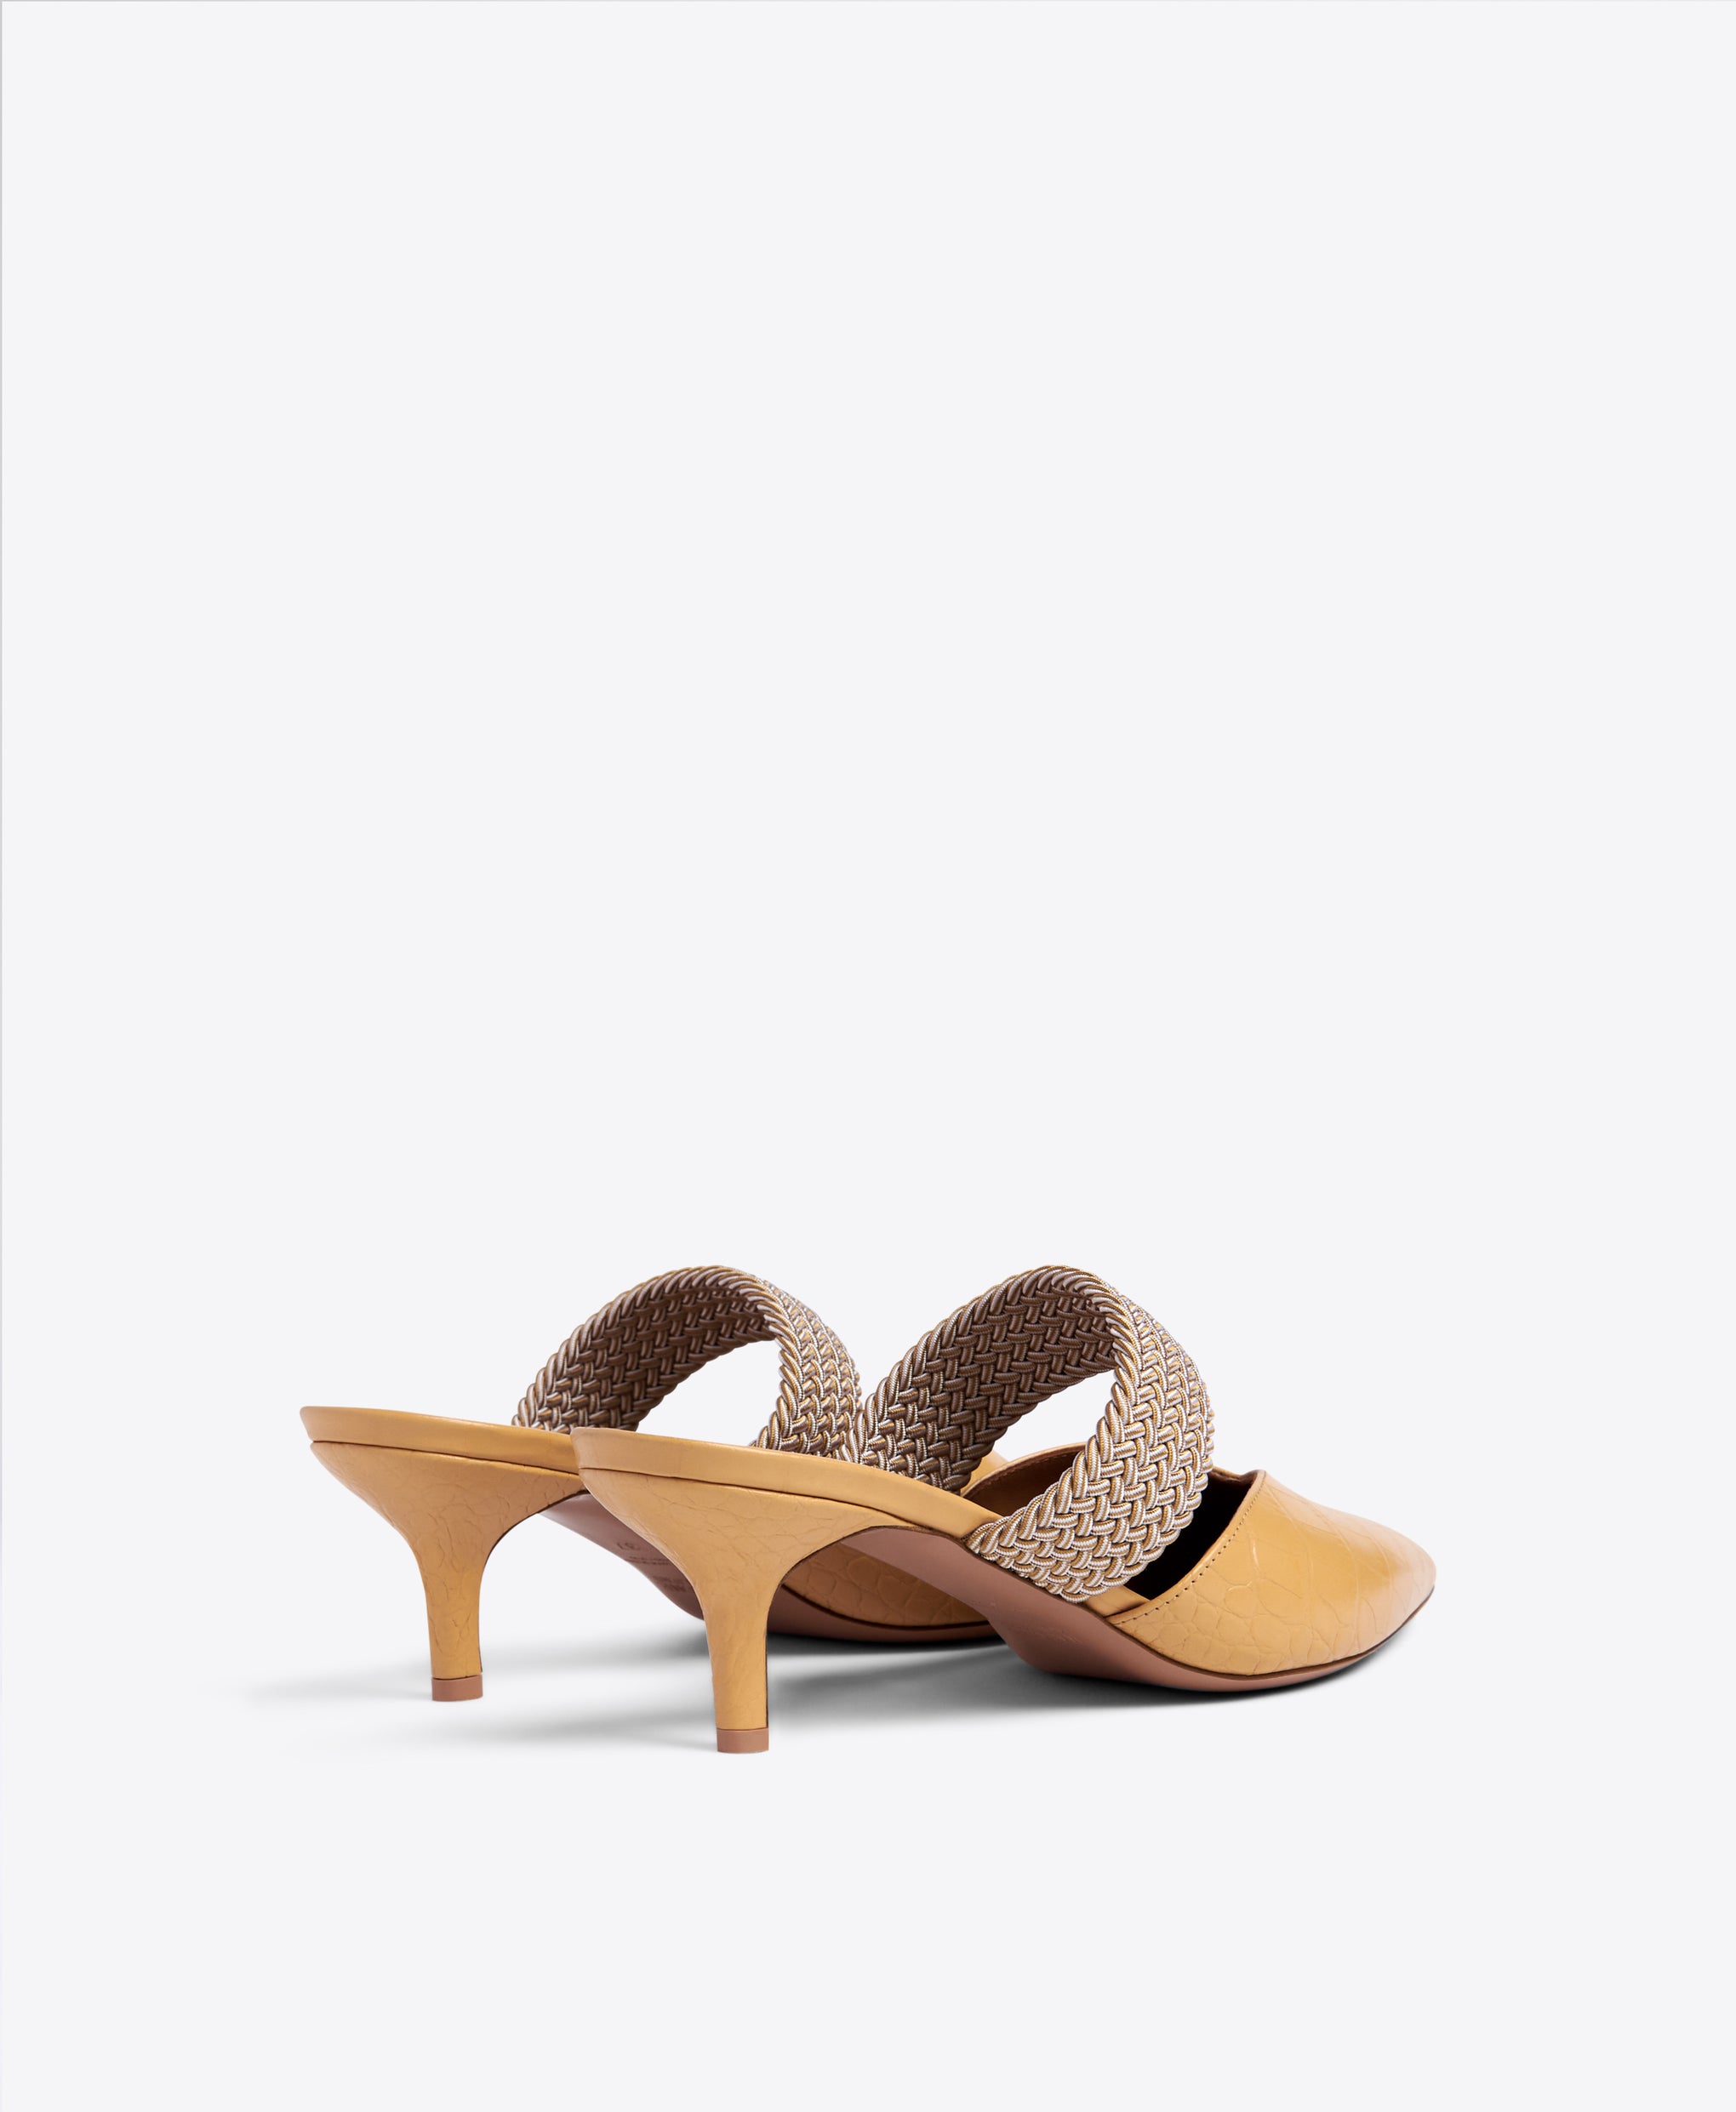 Beige Embossed Leather Stiletto Mules - Pointed Toe with Elastic Strap | Malone Souliers 